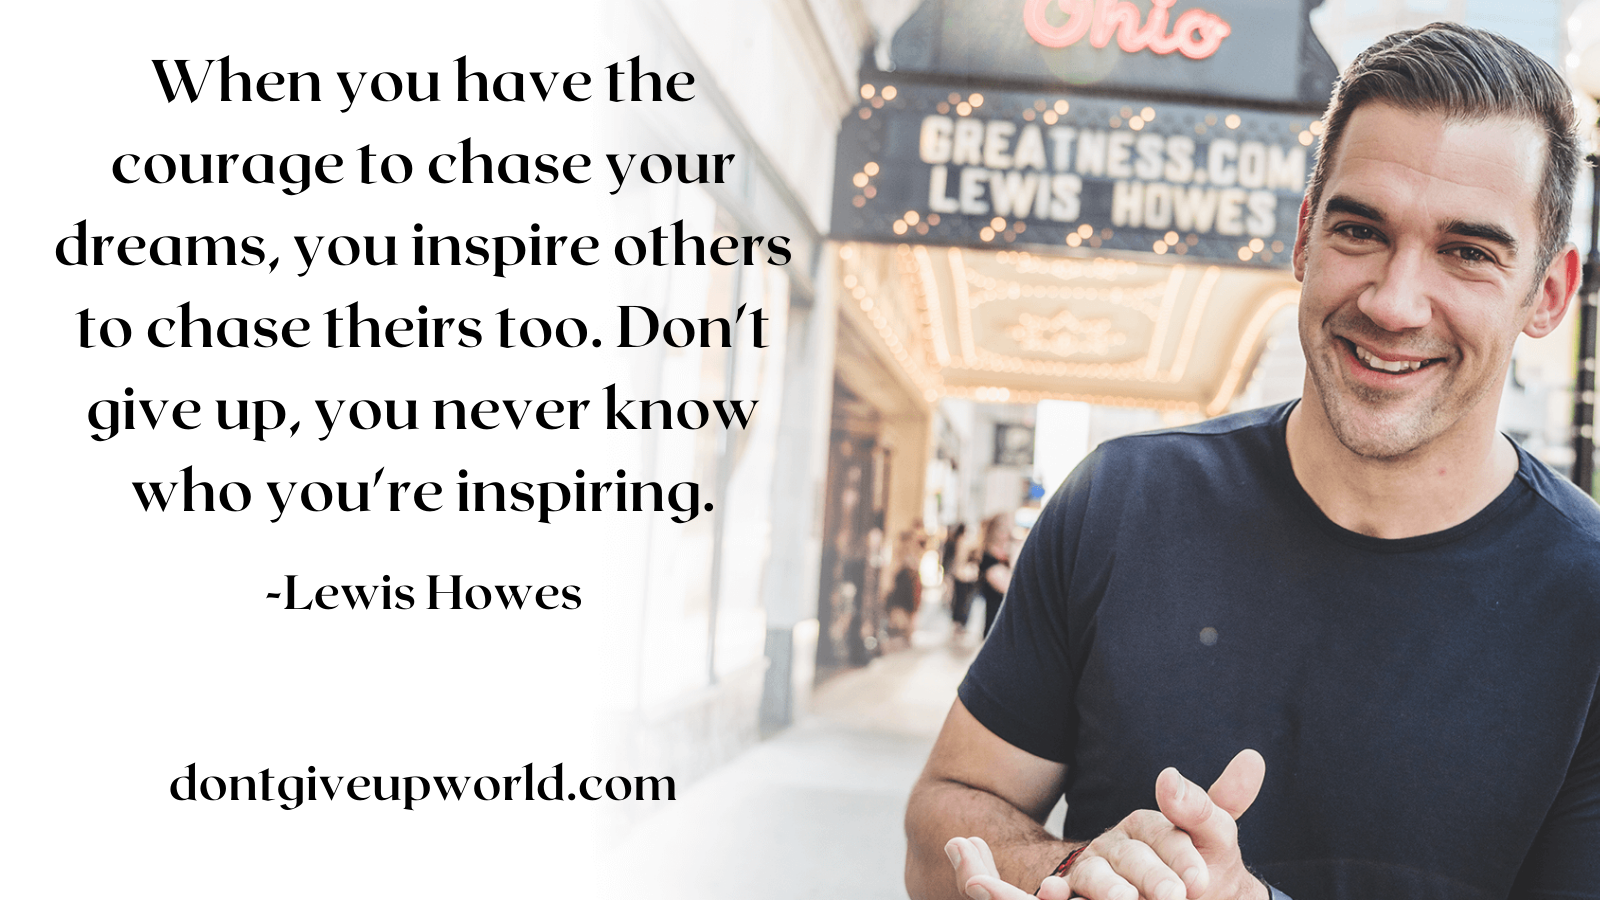 quote on inspiring others to chase a dream by Lewis Howes